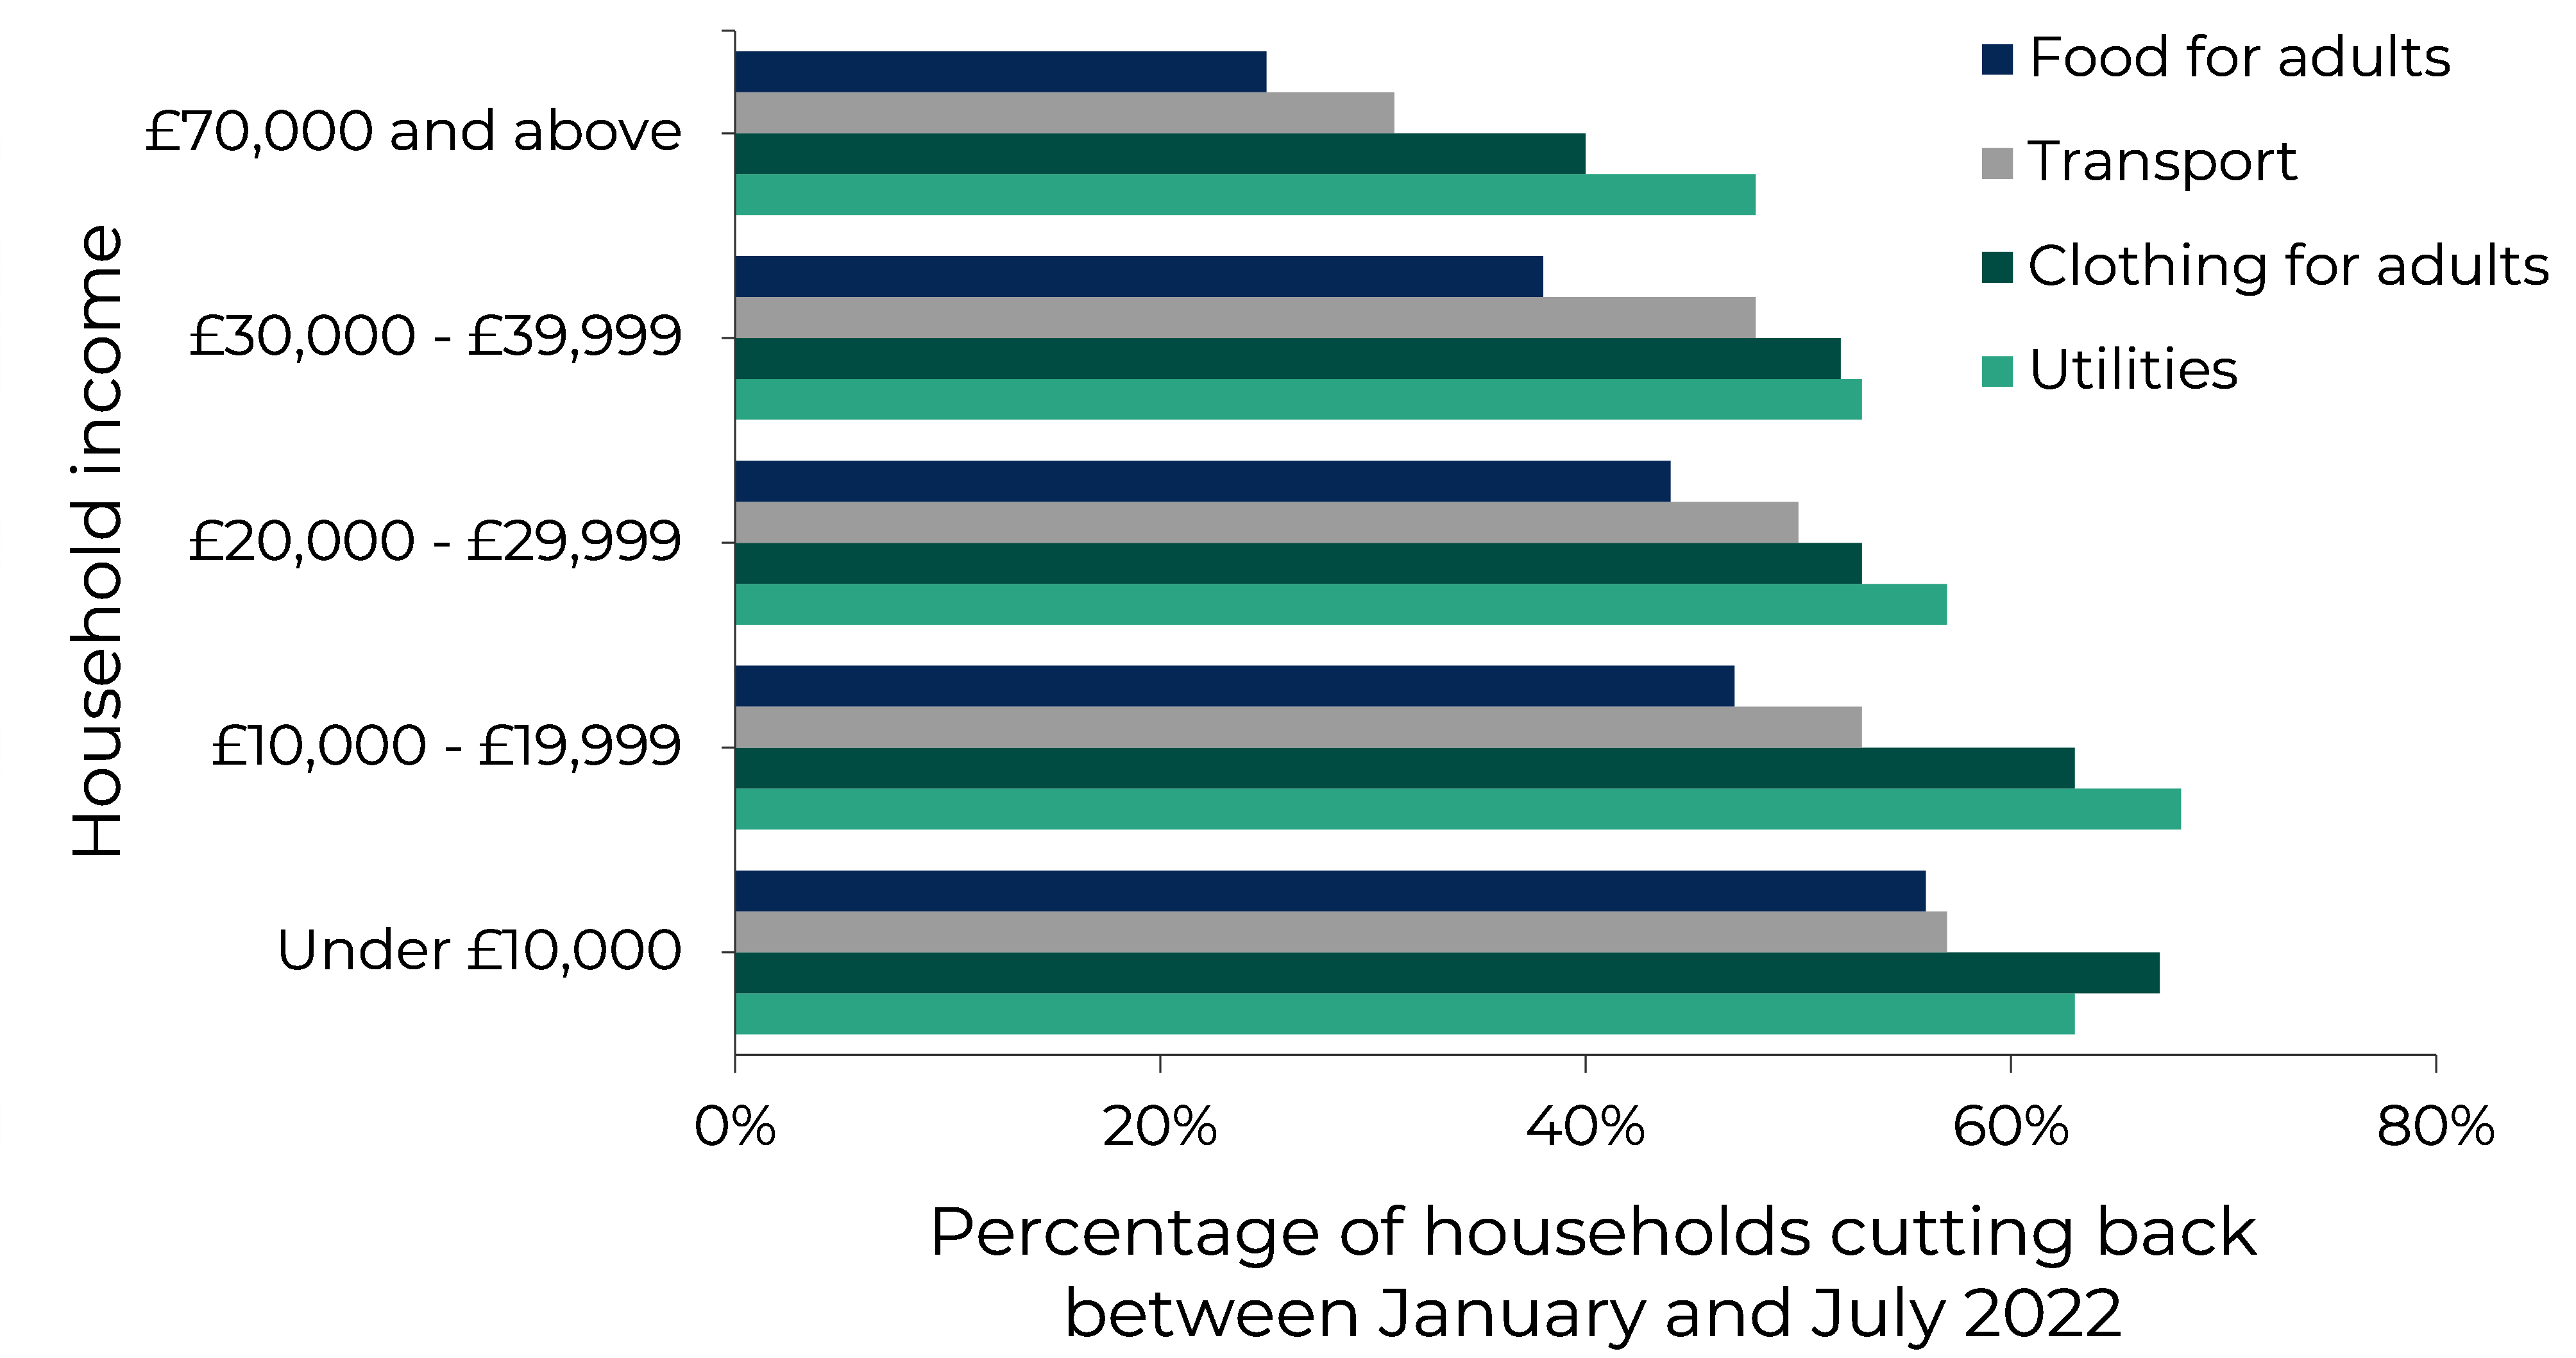 Graph showing that poorer households are more likely to be cutting back on utilities, clothing for adults, transport and food for adults than richer households.